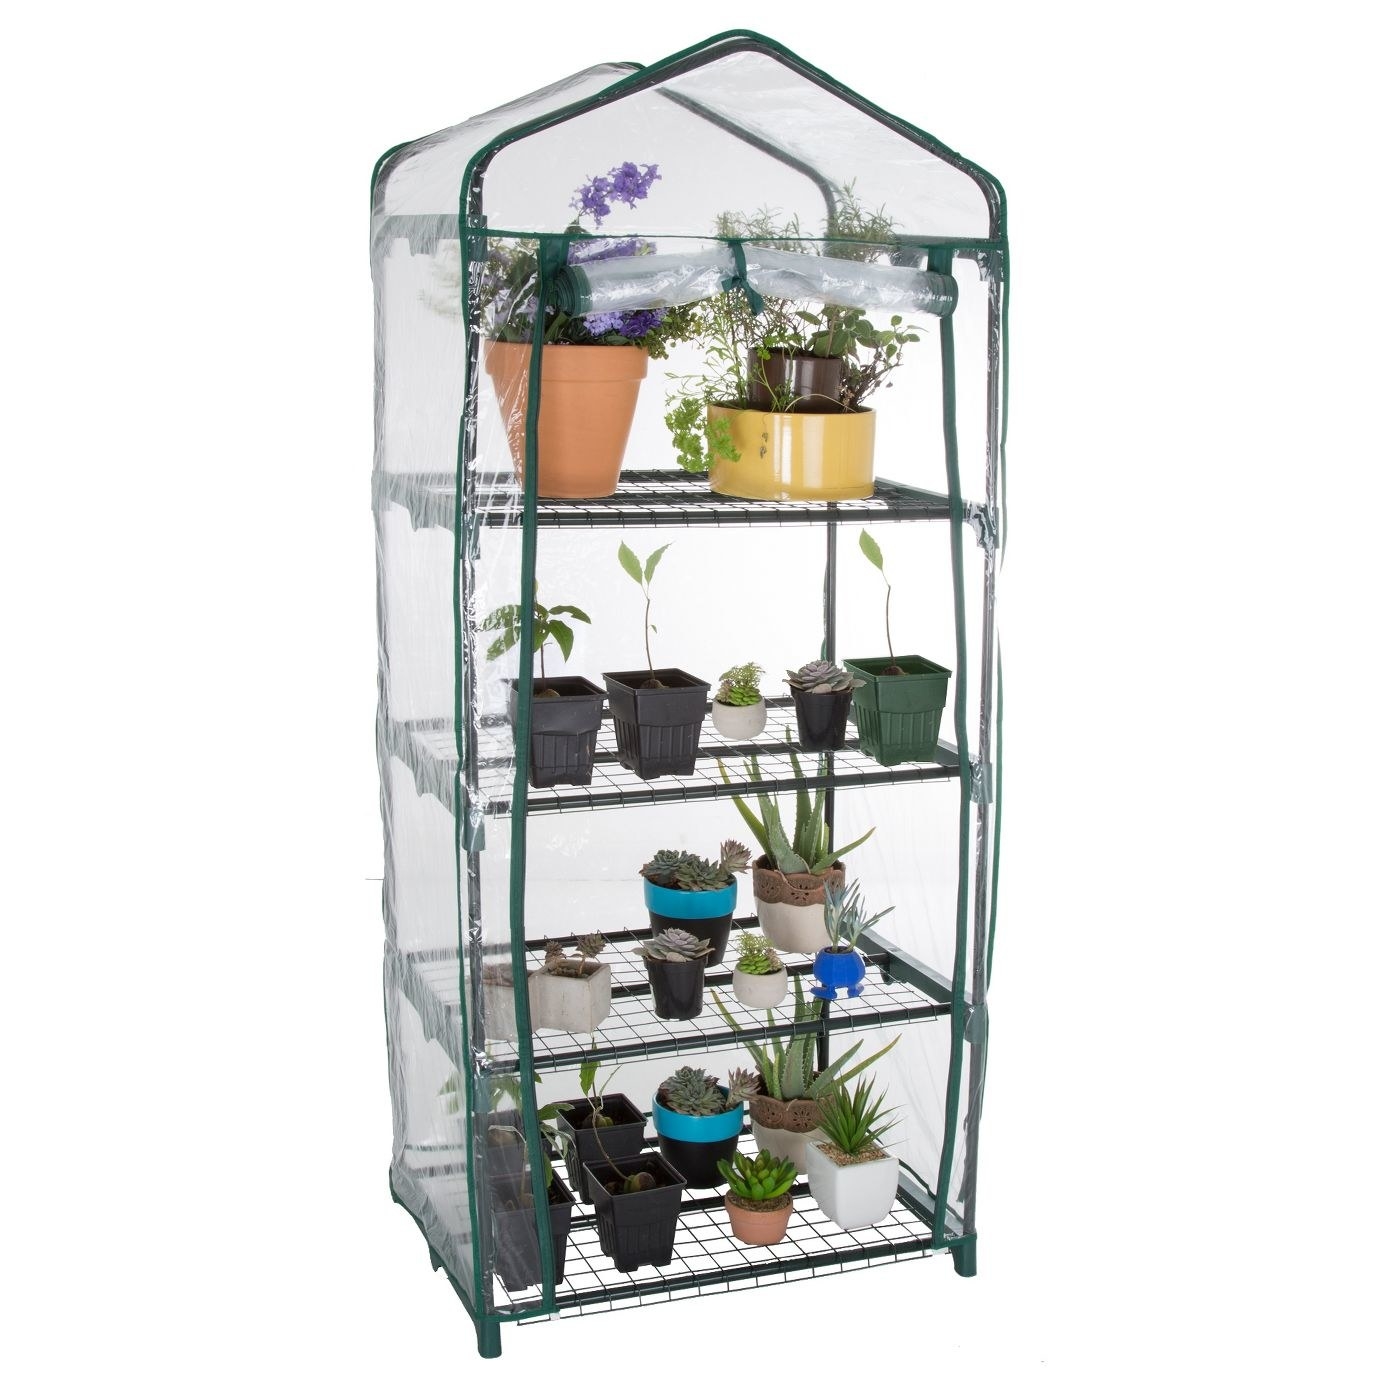 A four-shelf greenhouse with a plastic cover 